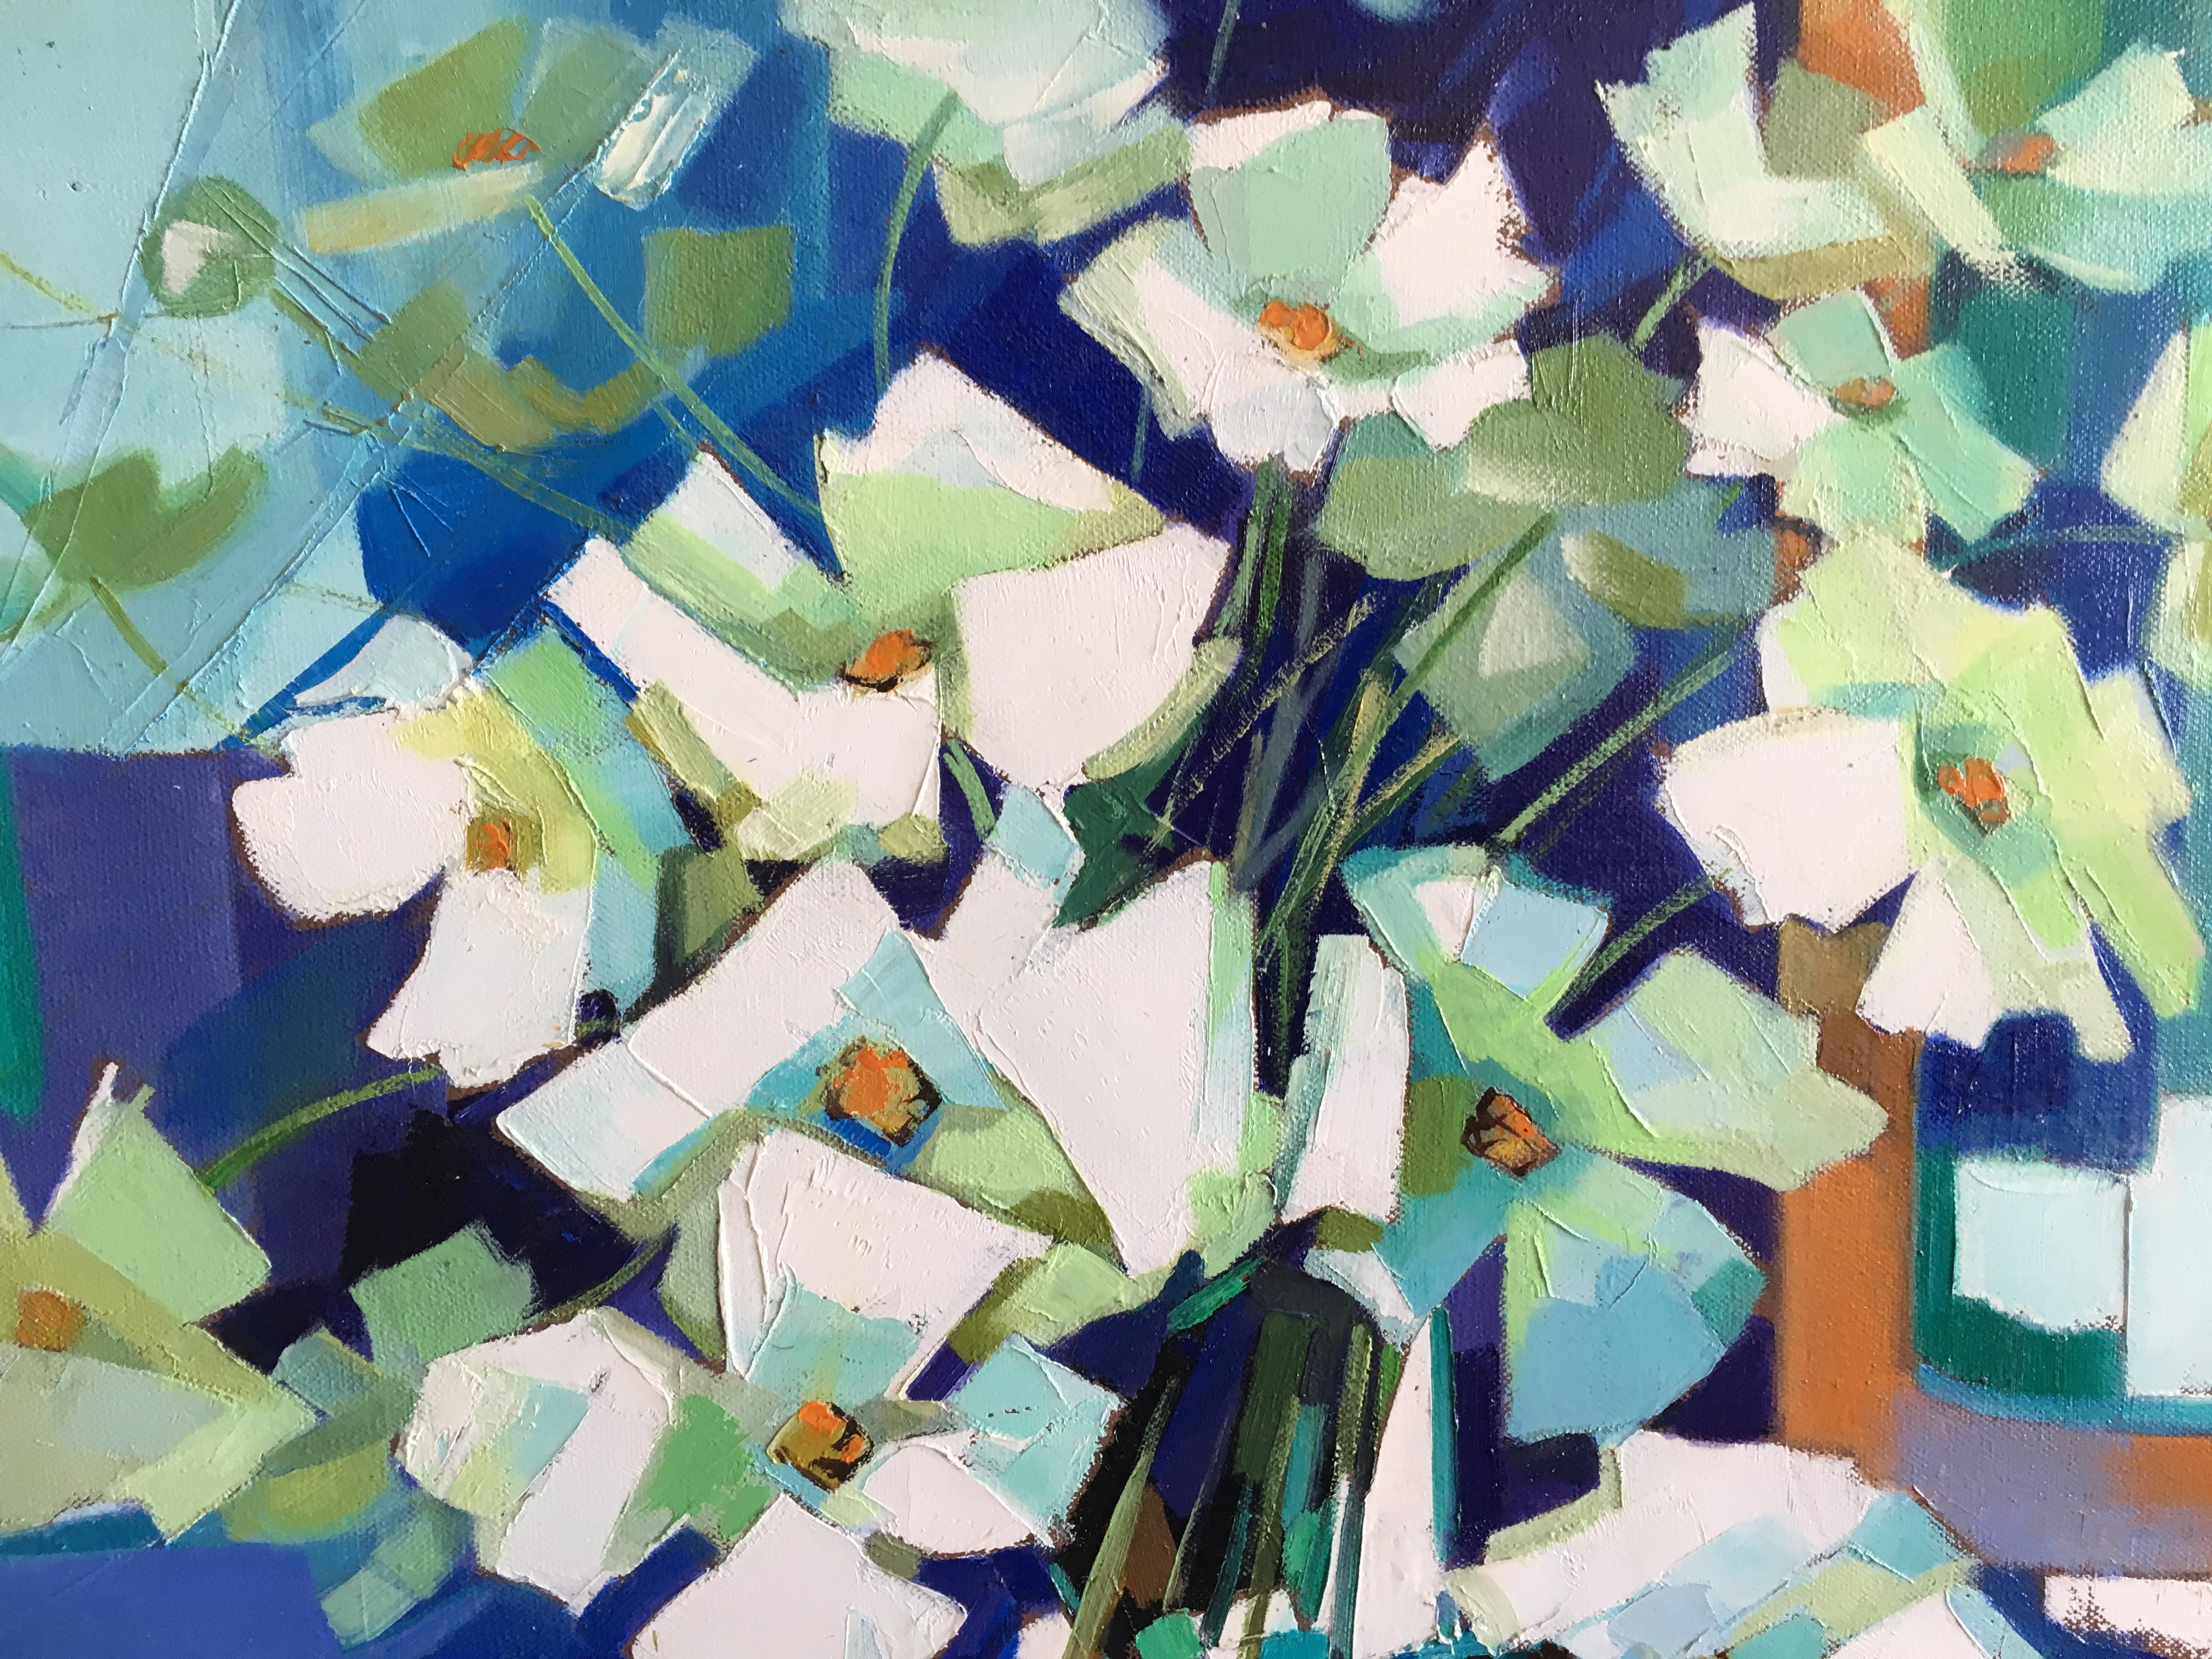 White symphony, oil on canvas by French artist Jori Duran, is a remarkable palette work.
Dimension cm: 73 H x 92 W x 2 D

Jori Duran, is a capital artist.
She has been working as a teacher, book illustrator for the luxury editions “Carrés d'Art”